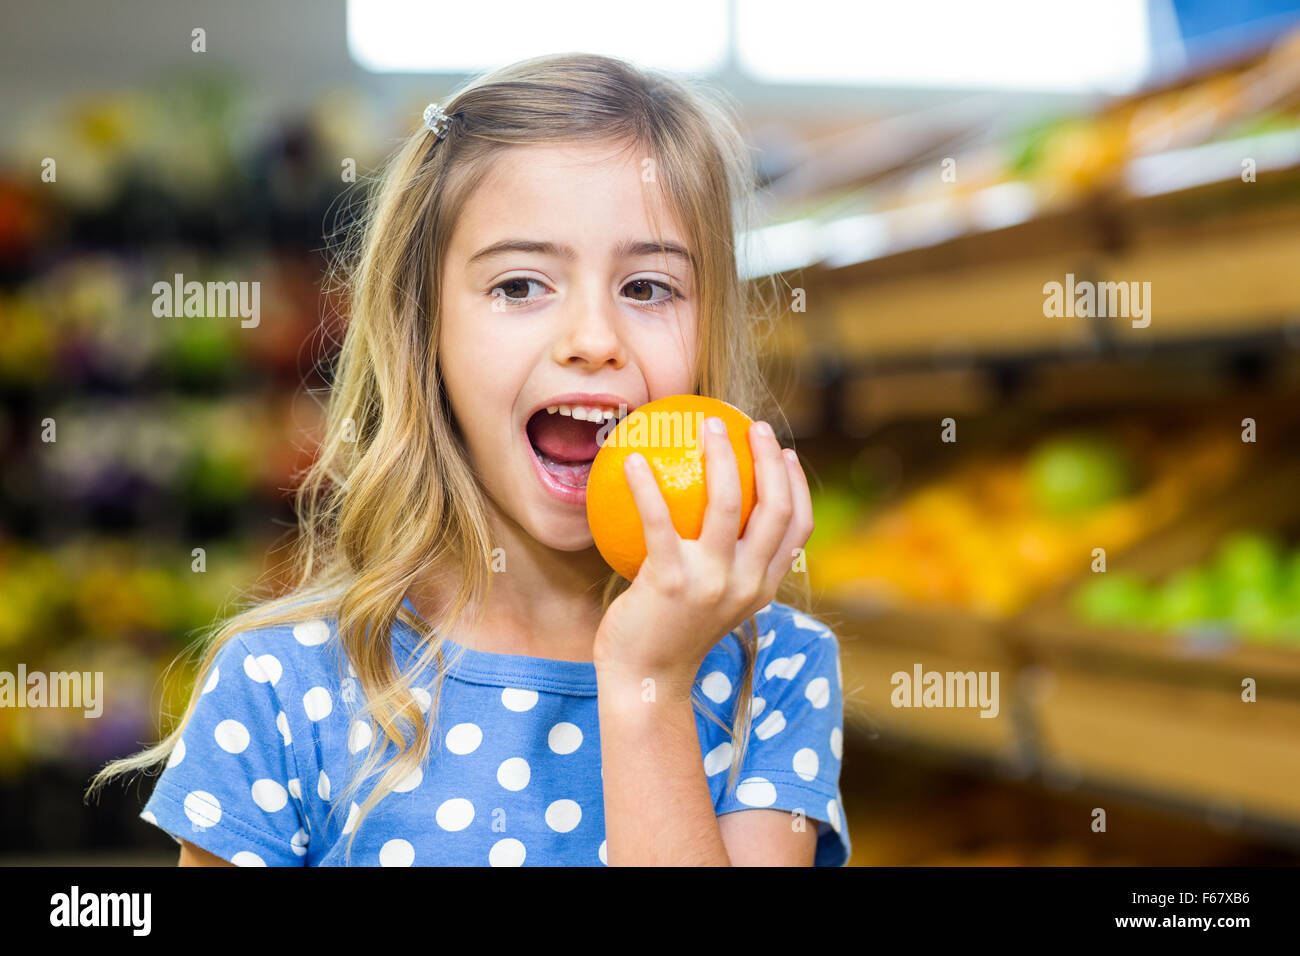 Smiling young girl eating une orange Banque D'Images